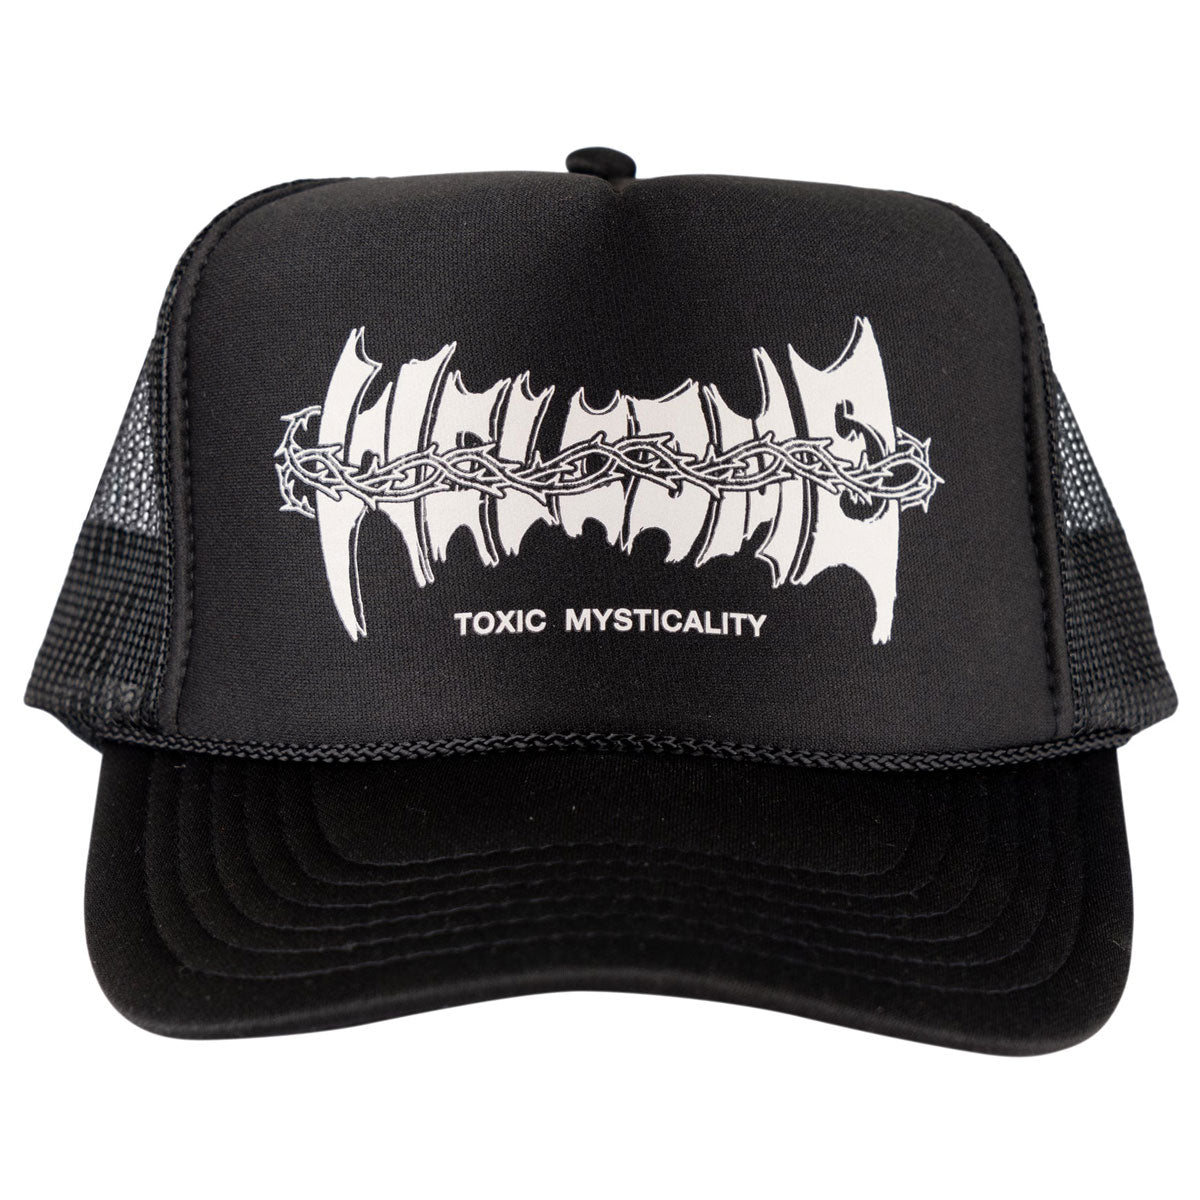 Welcome Mysticality Trucker Hat - Black image 3